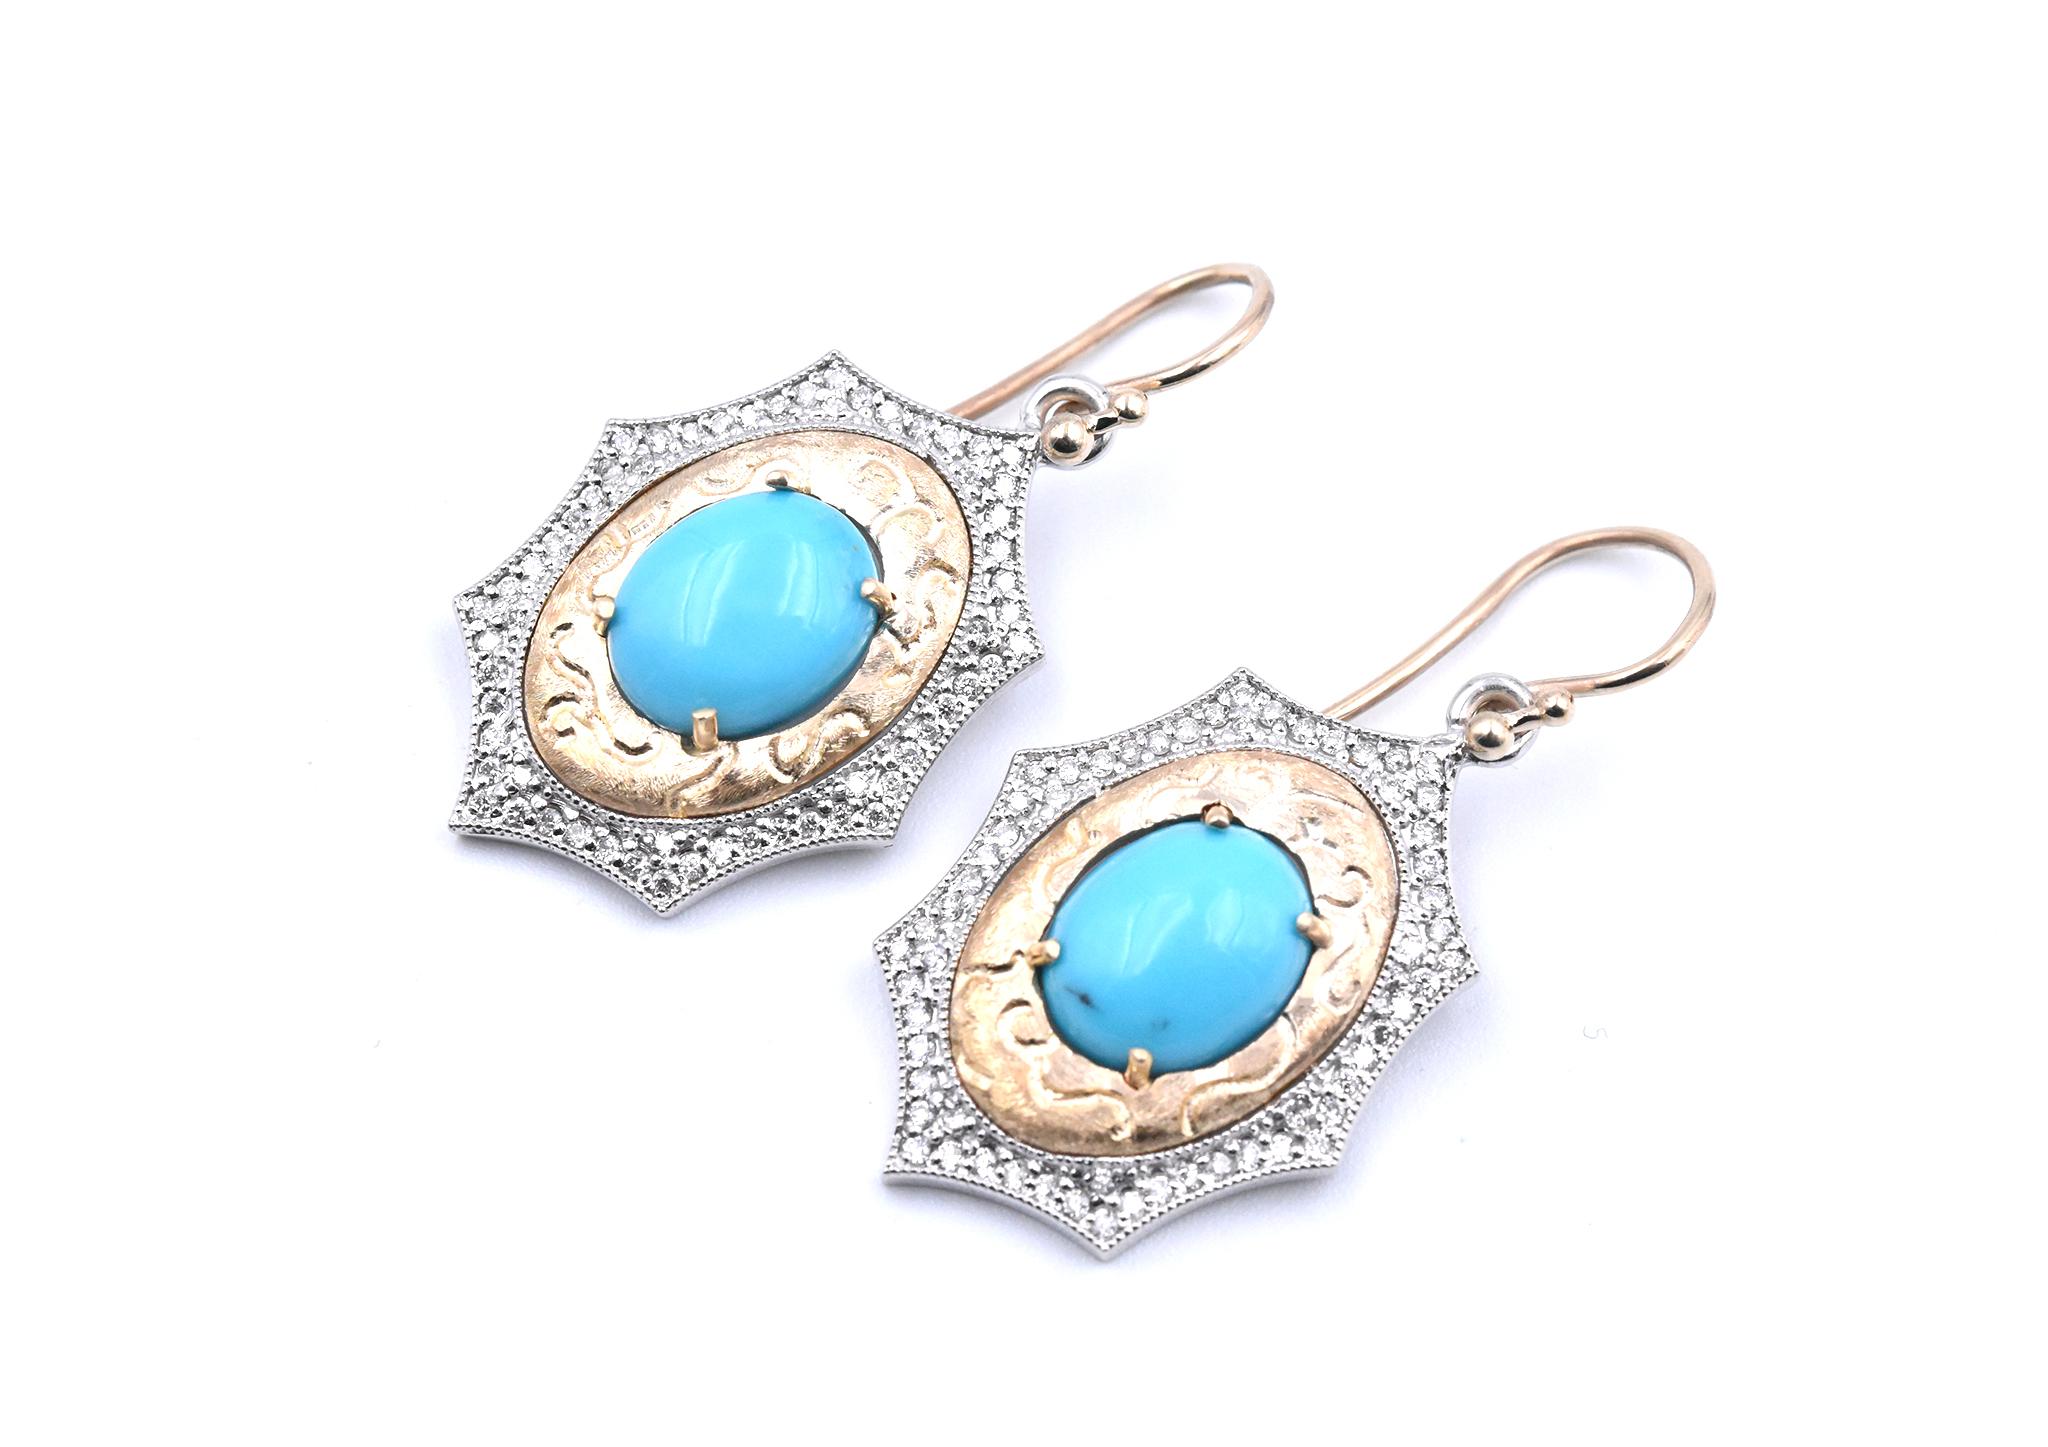 Designer: custom design
Material: 14k white/yellow gold
Turquoise: 2 oval cabochon Bisbee turquoise
Diamonds: round brilliant cuts = 1.10cttw
Dimensions: earrings measure 18.75mm x 37.60mm
Fastenings: French wire back
Weight: 10.97 grams
